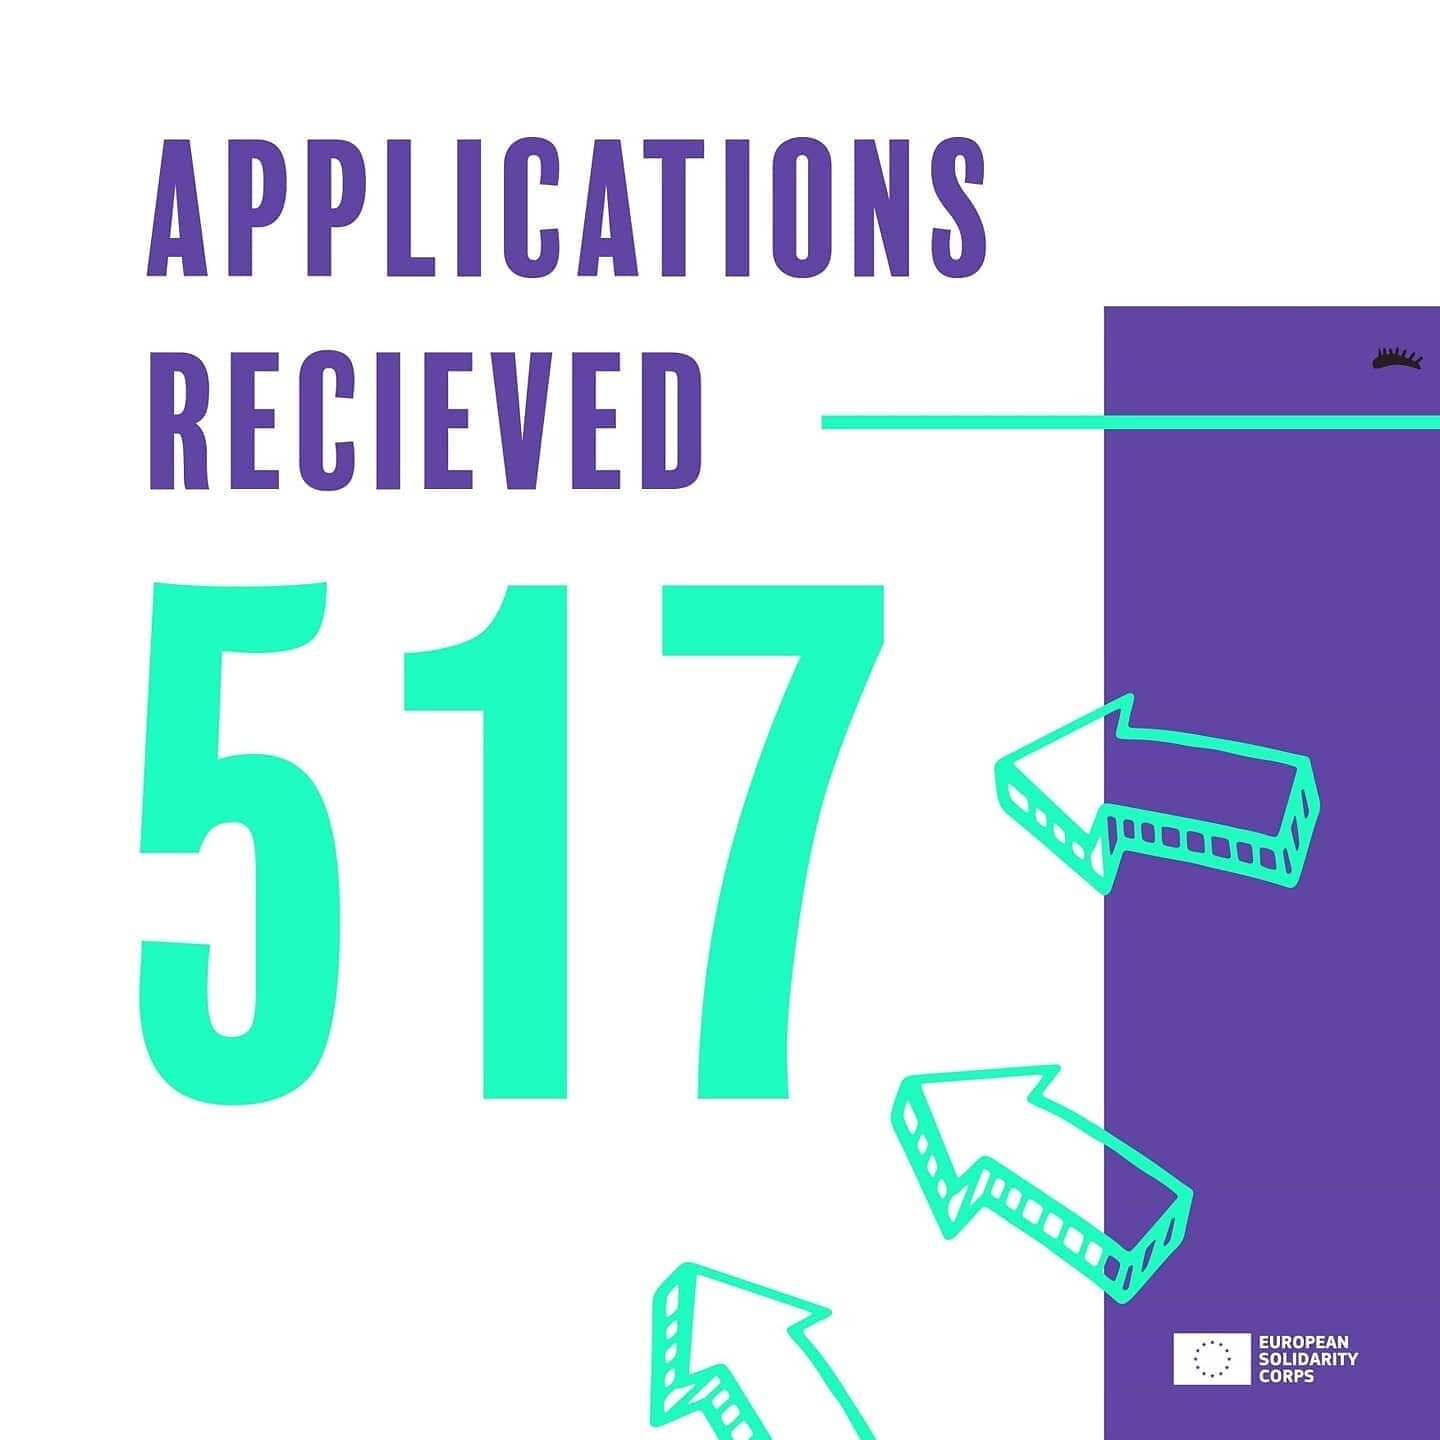 𝑰𝒏𝒕𝒆𝒓𝒅𝒊𝒔𝒄𝒊𝒑𝒍𝒊𝒏𝒂𝒓𝒚 𝑺𝒕𝒐𝒓𝒚𝒕𝒆𝒍𝒍𝒊𝒏𝒈 application closed! Here's how it looks in numbers.

A big thanks and congratulations to all of you who took the time to apply!

We begin reviewing the applications today and will, by the 21